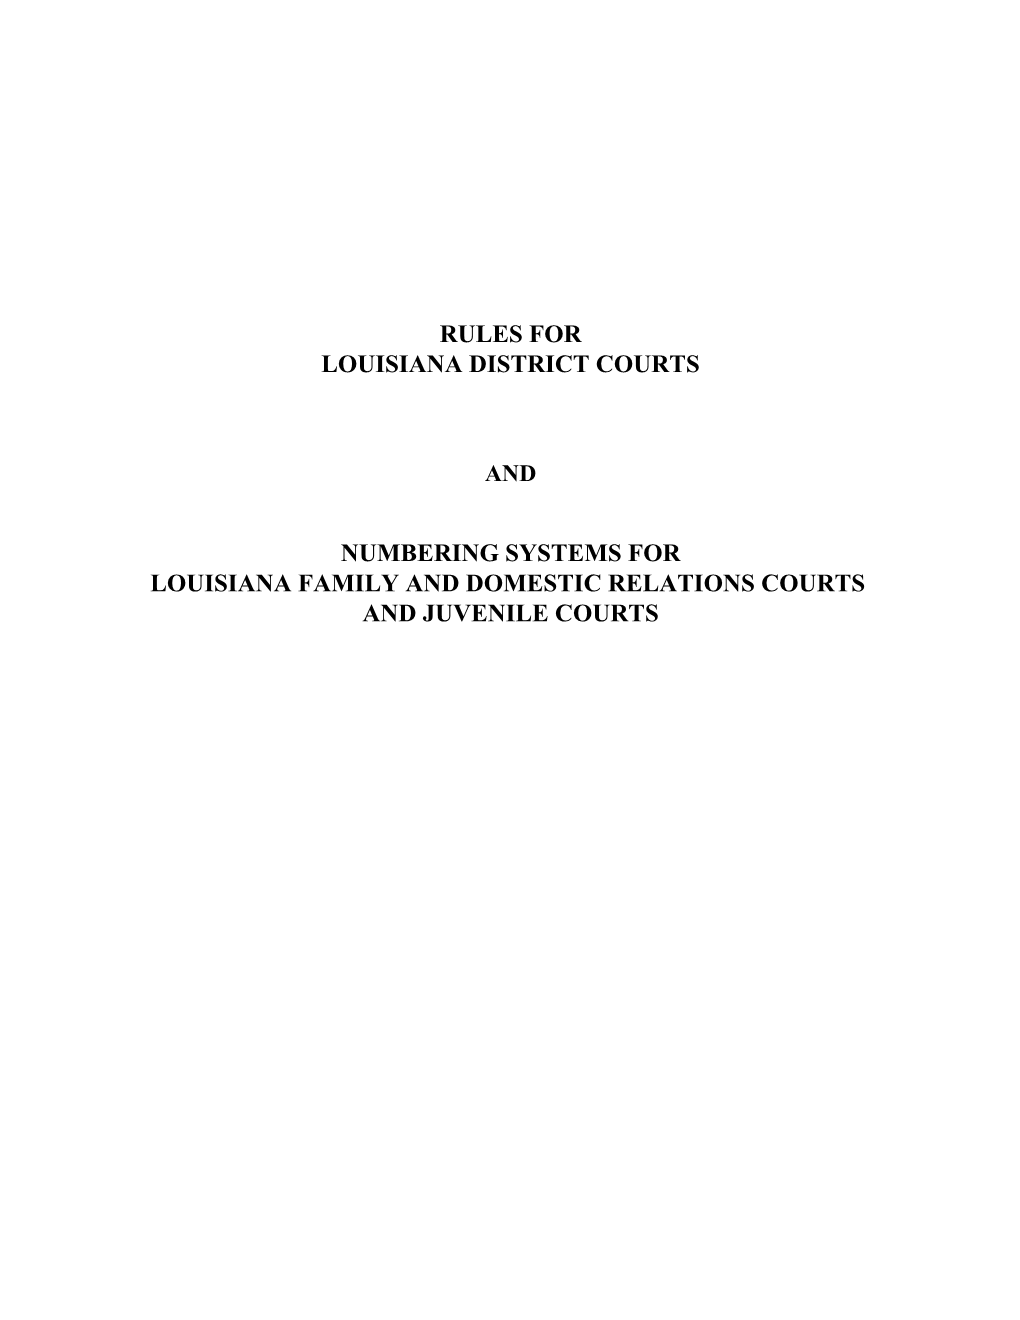 Rules for Louisiana District Courts